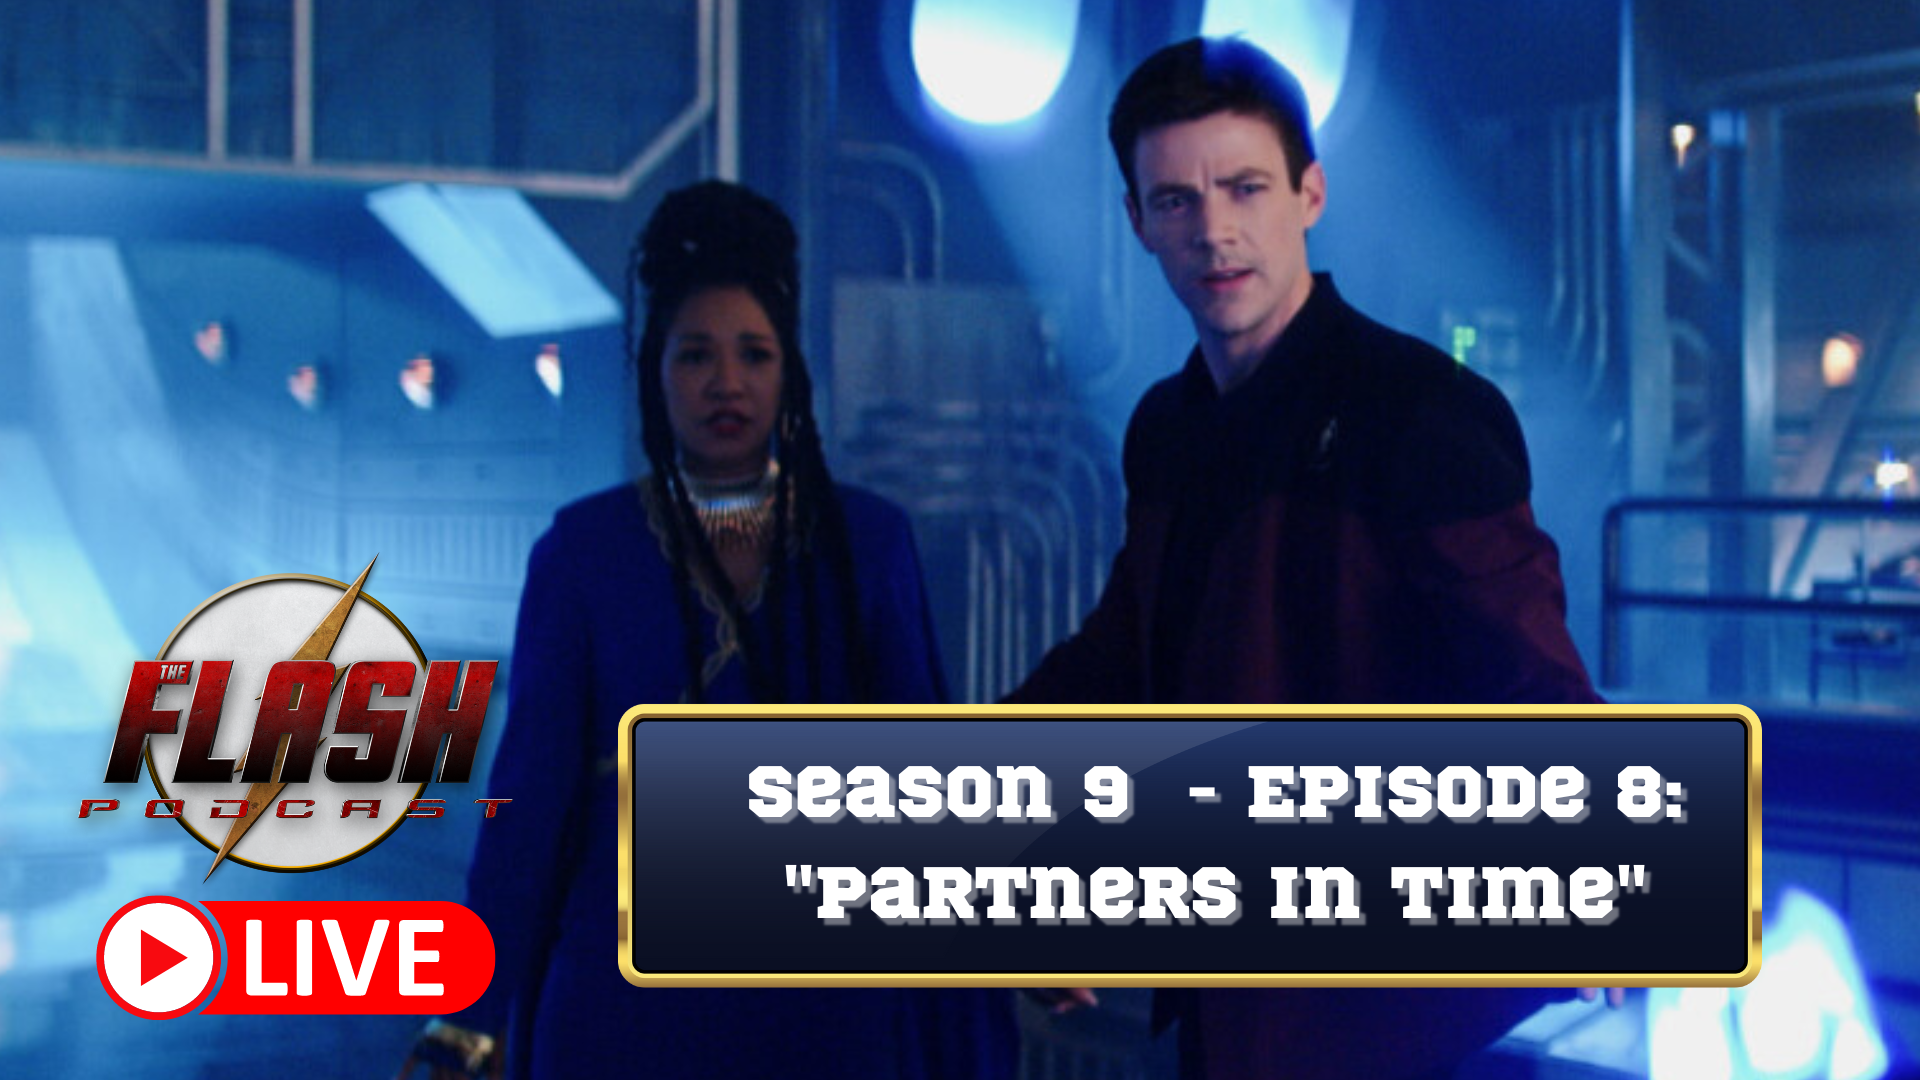 The Flash Podcast LIVE Season 9 - Episode 8 Partners In Time